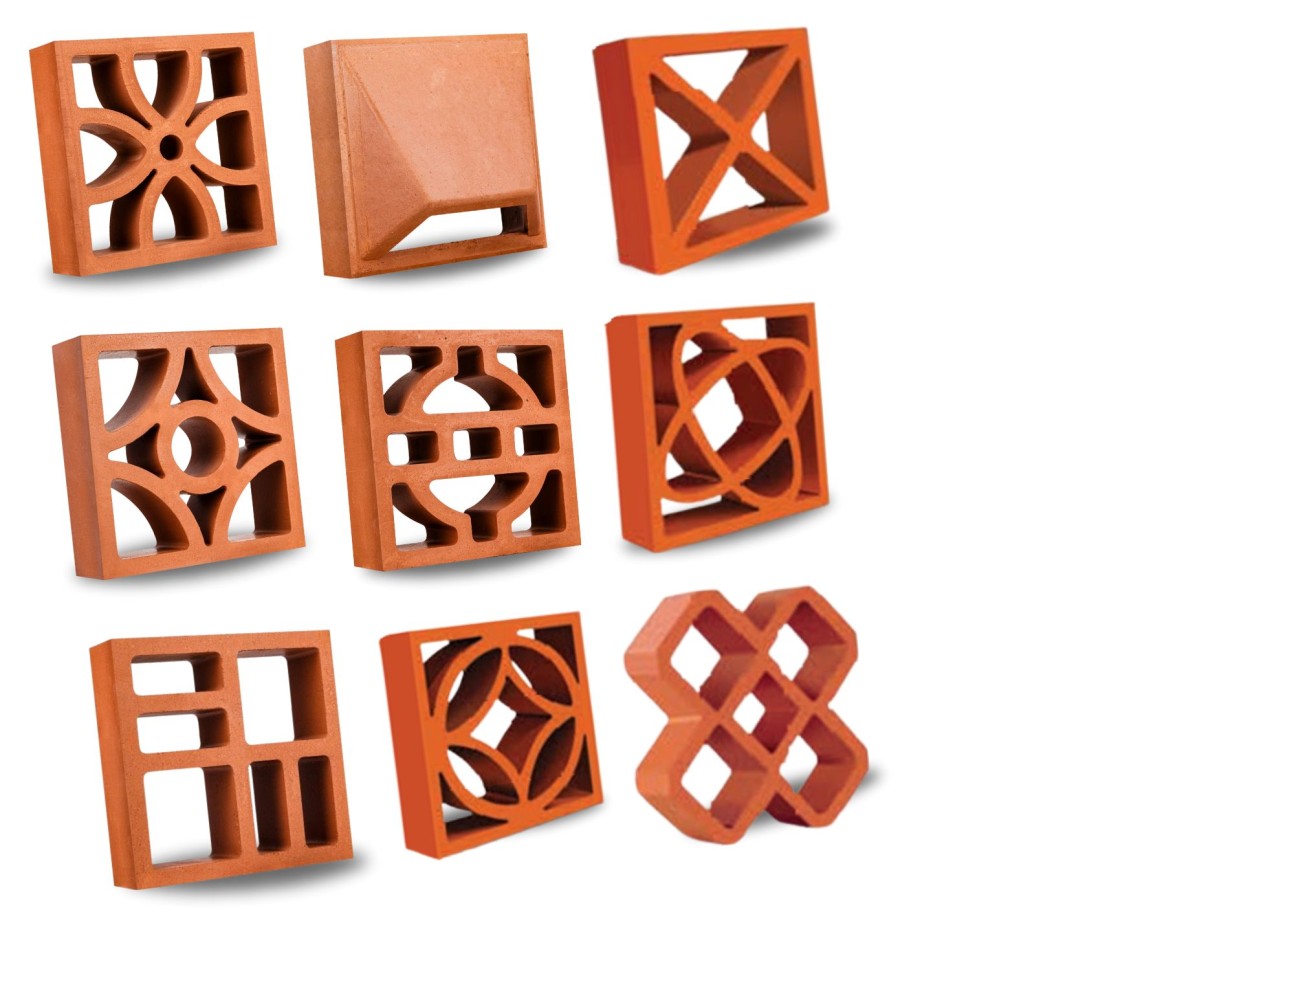 Terracotta jali patterns: intricate floral, geometric, and abstract designs on terracotta panels.